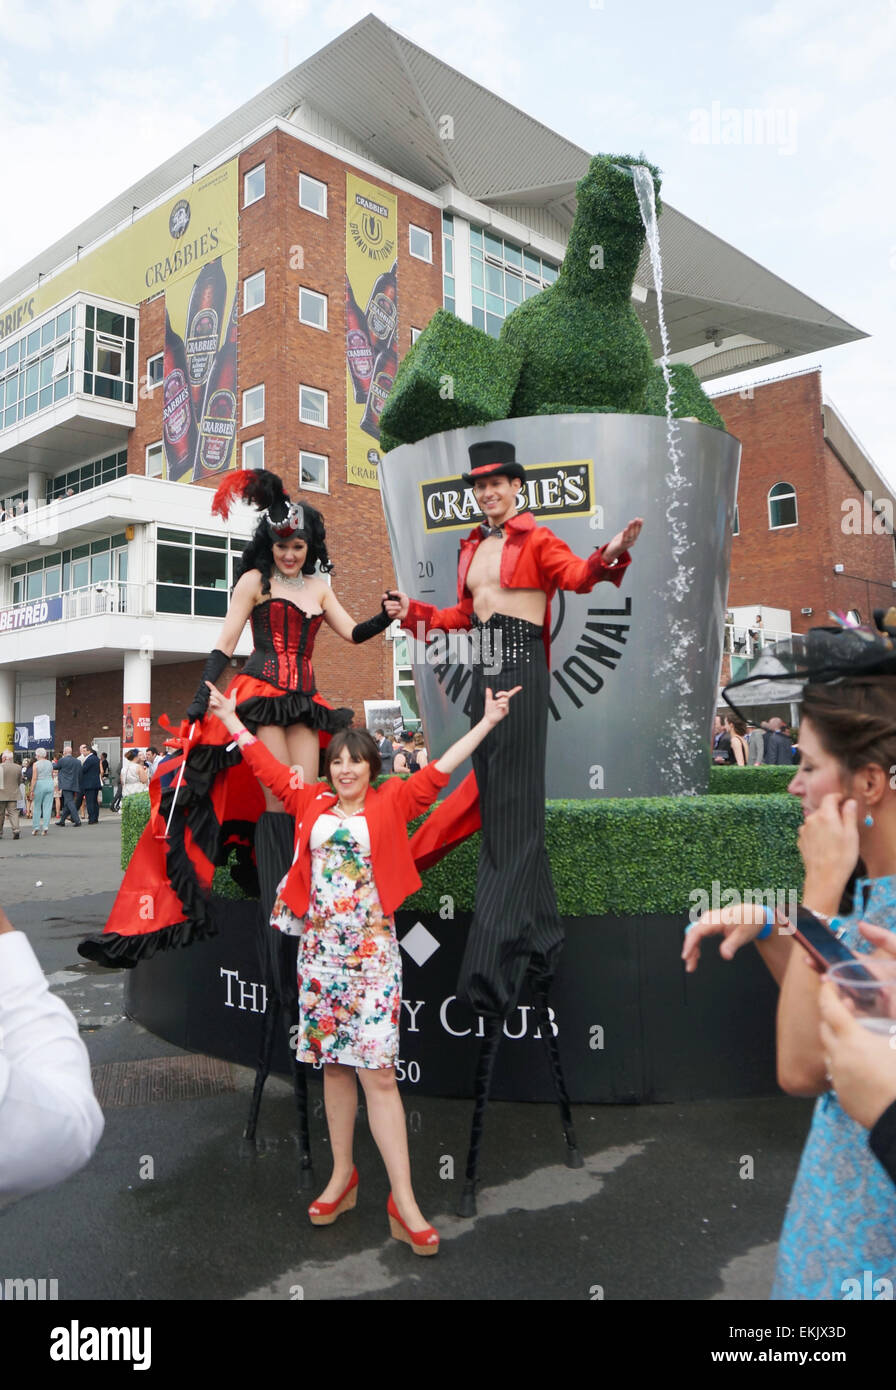 Liverpool, UK. 10th Apr, 2015. Racegoers enjoy Ladies Day At Aintree - Crabbie's Grand National 2015. The sunshine on Friday attracted a large crowd of spectators dressed up to the nines at this year's colourful event which took place on Friday afternoon April 10th,2015 in Liverpool, UK. Credit:  Pak Hung Chan/Alamy Live News Stock Photo